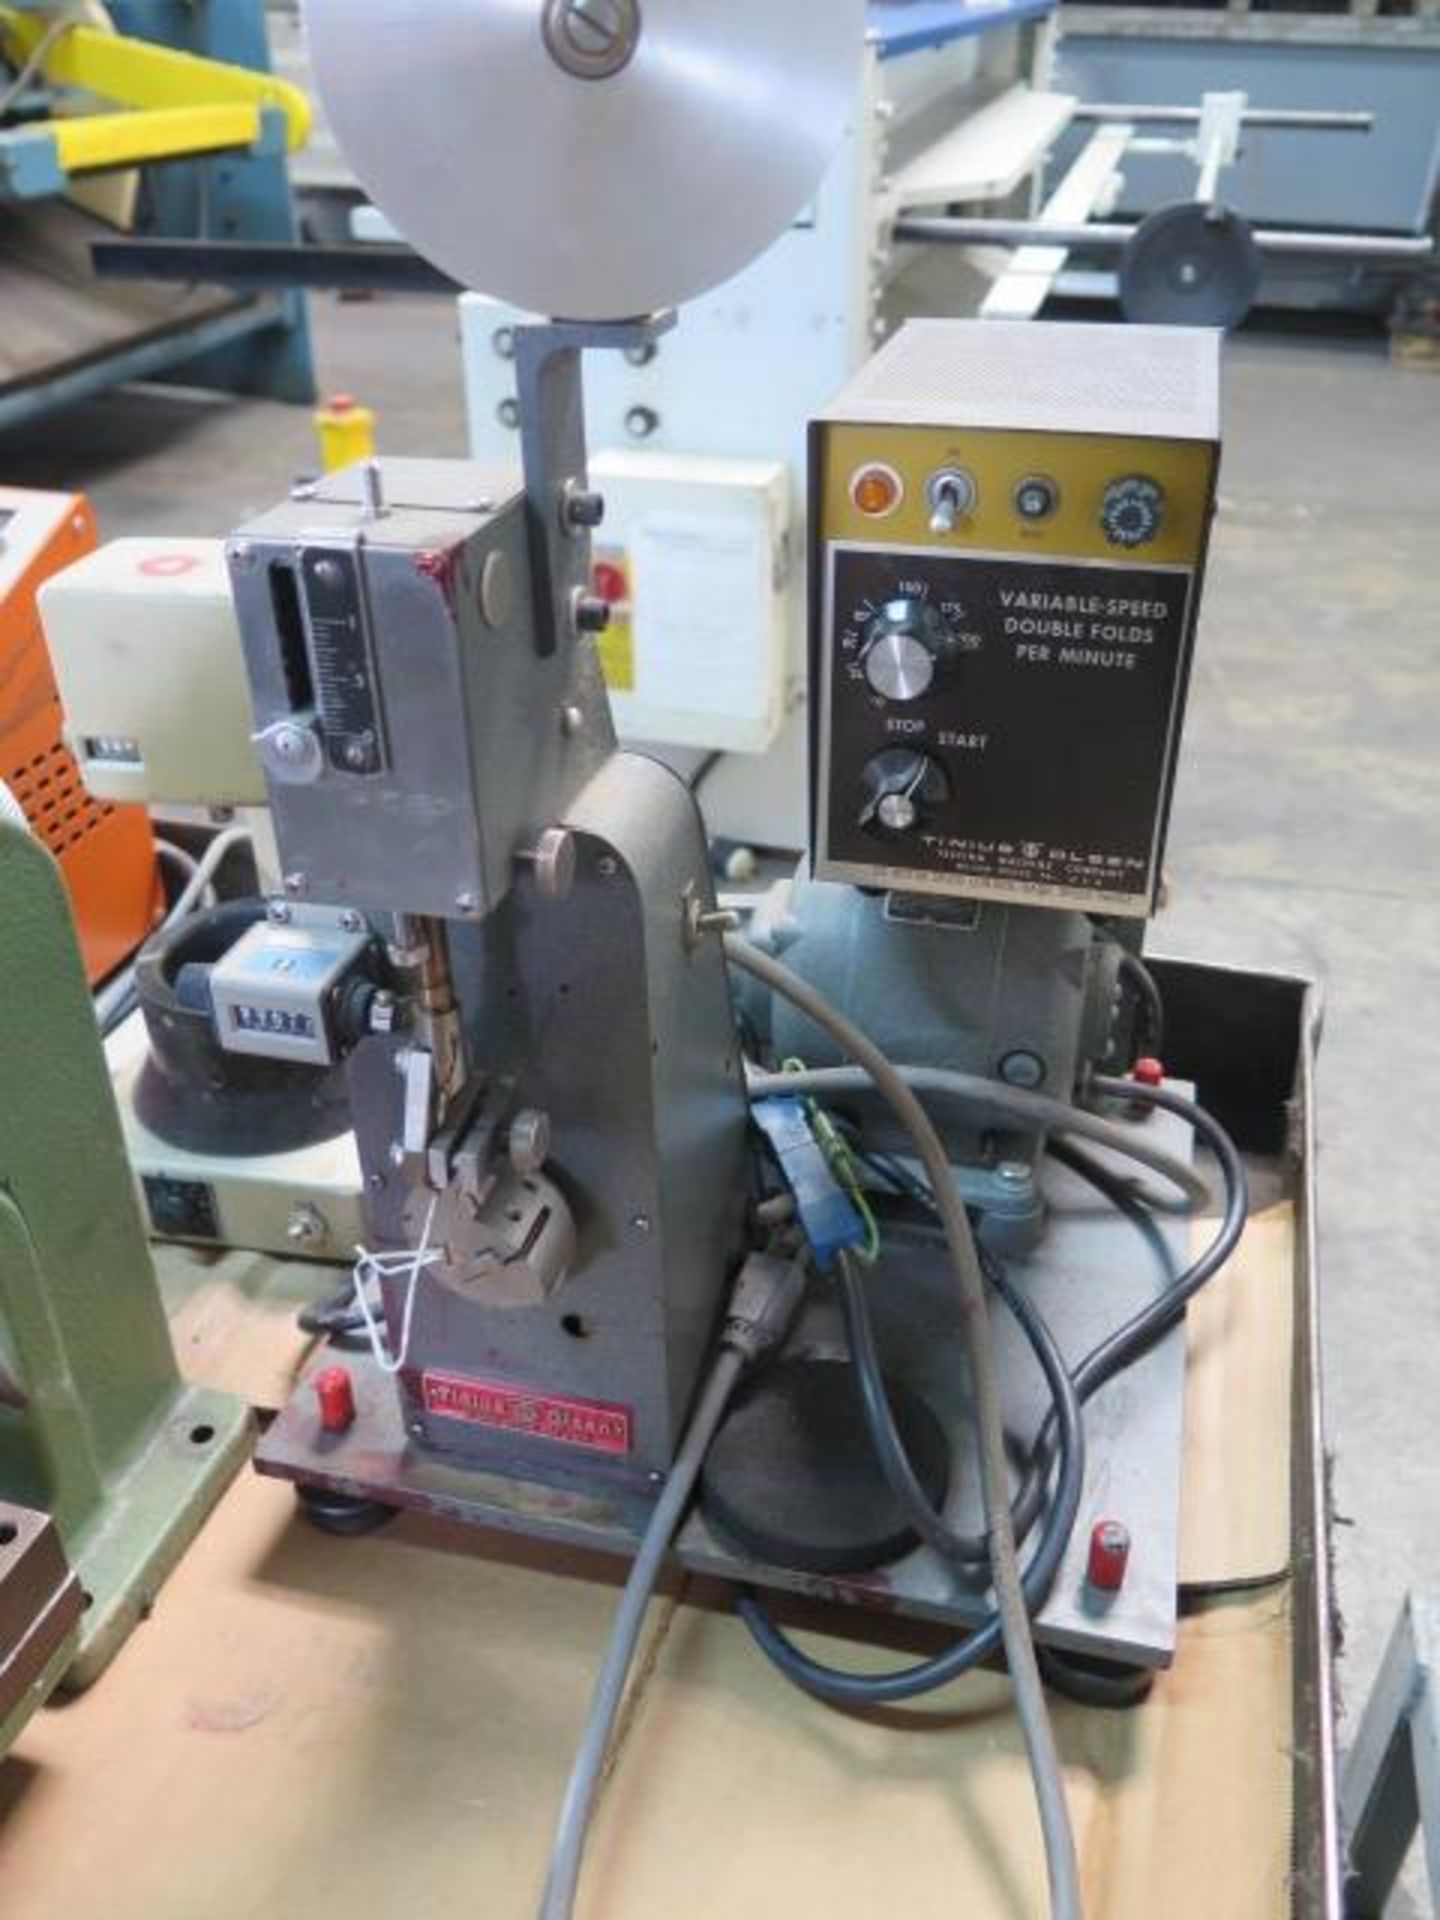 Eraser WC-2 Wire and Tube Cutter, Tinius Olson Testing Machine, Stienel Punch and Shyodu Test devise - Image 3 of 5